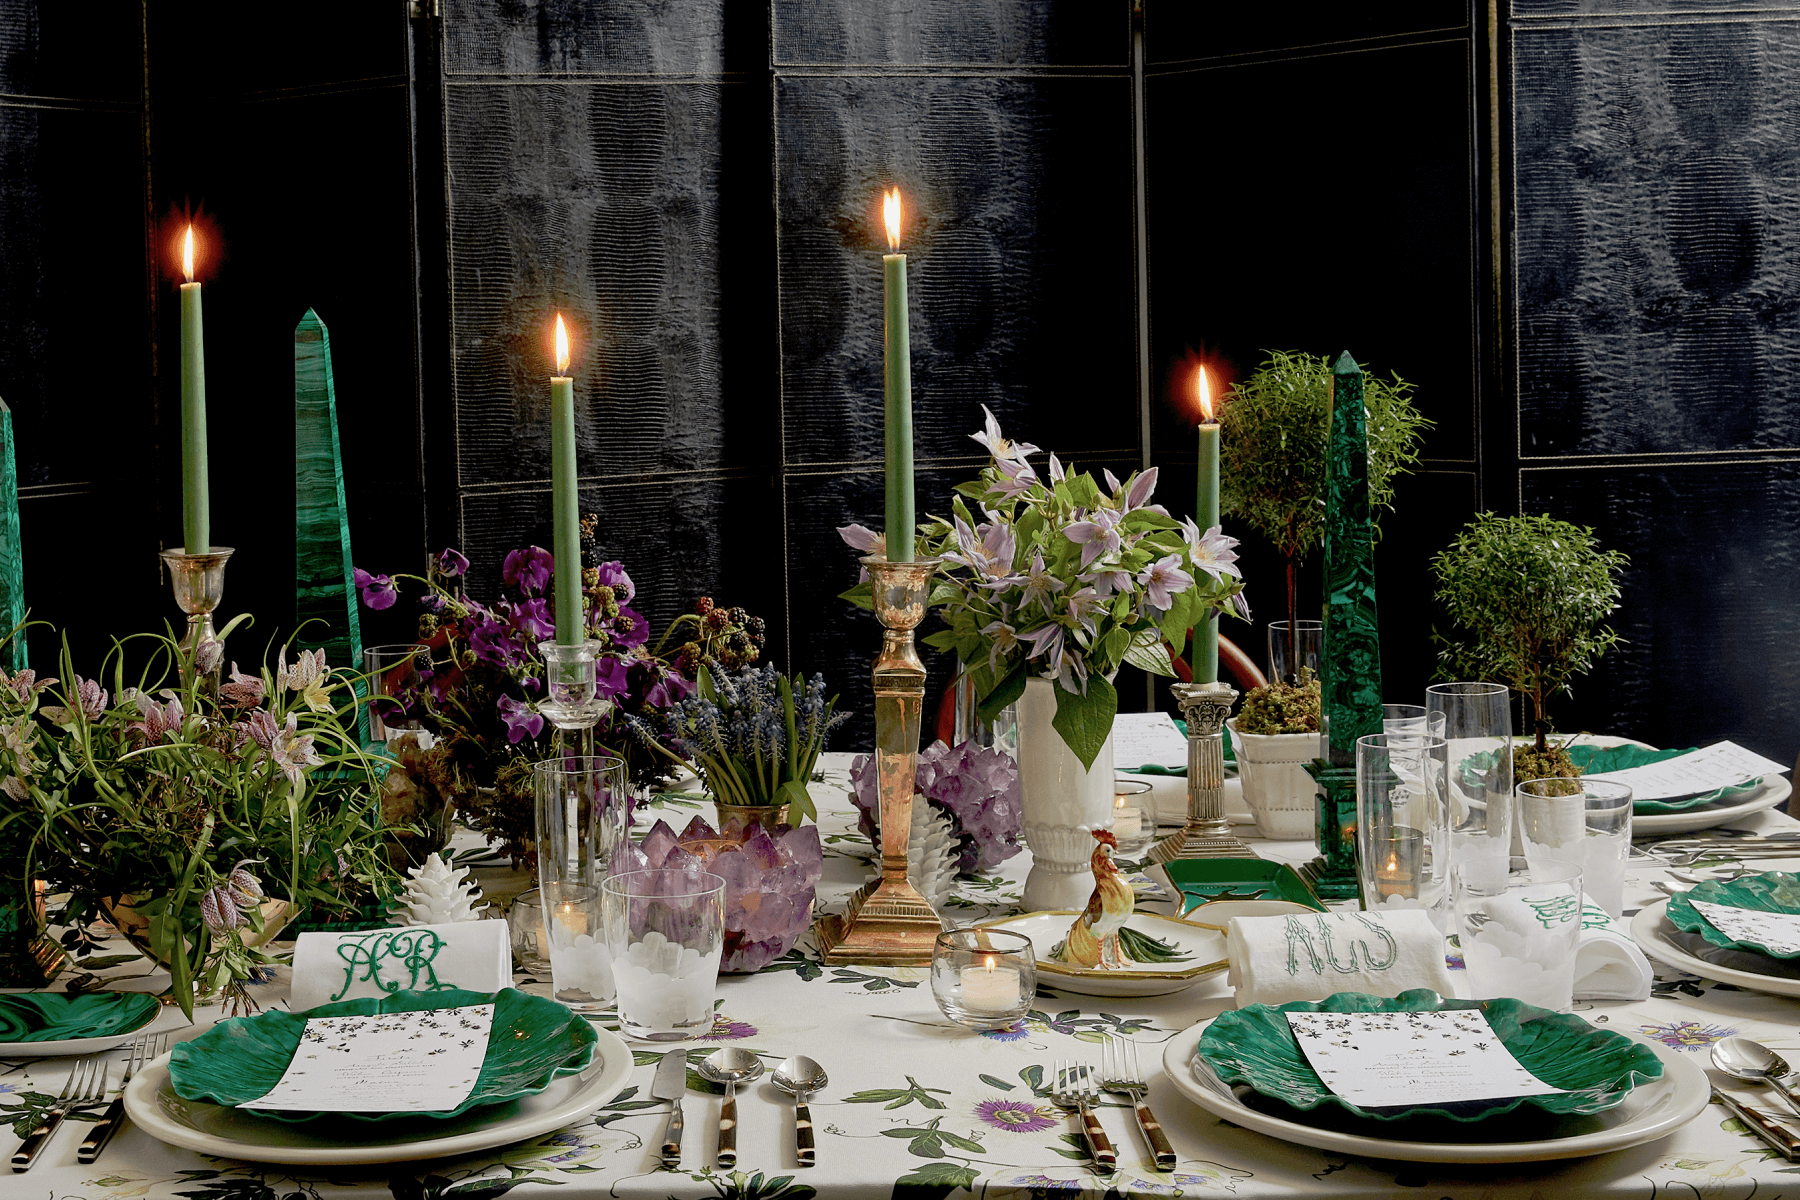 Evening, candle-lit dinner table scene with white tablecloth, green plates and purple flowers.